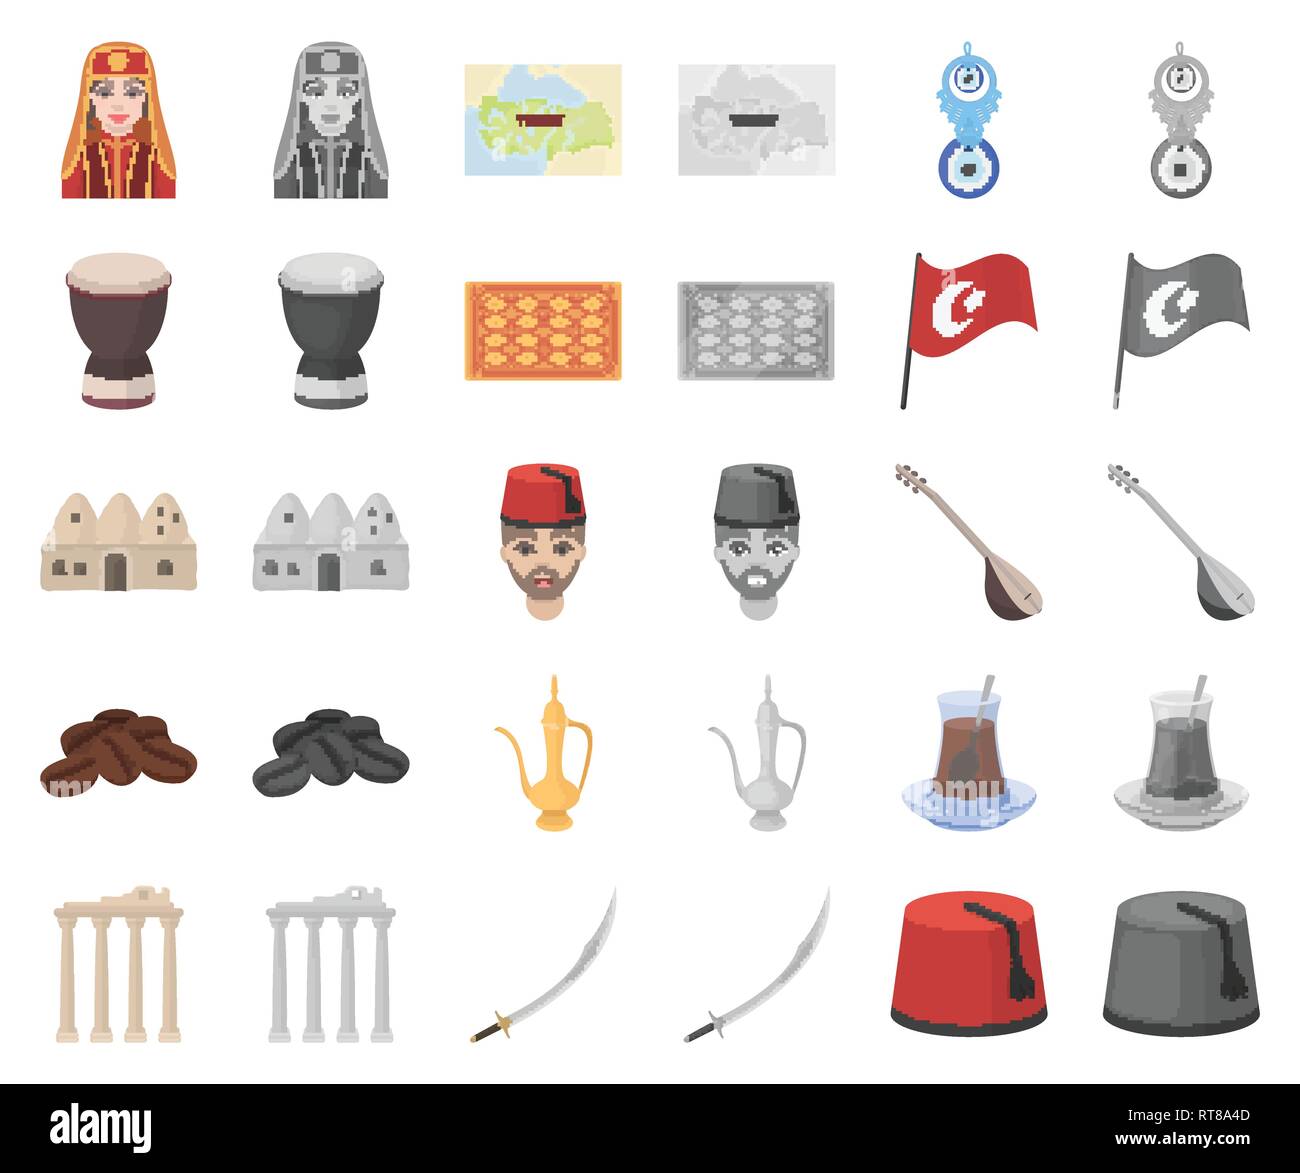 amulet,art,attraction,beans,beehive,carpet,cartoon,monochrom,coffee,collection,country,culture,design,drum,fez,flag,goblet,hookah,house,icon,illustration,isolated,journey,jug,kilij,logo,man,nazar,population,ruins,saz,set,showplace,sight,sign,symbol,tea,territory,tourism,traditions,traveling,turkey,turkish,vector,web,woman Vector Vectors , Stock Vector